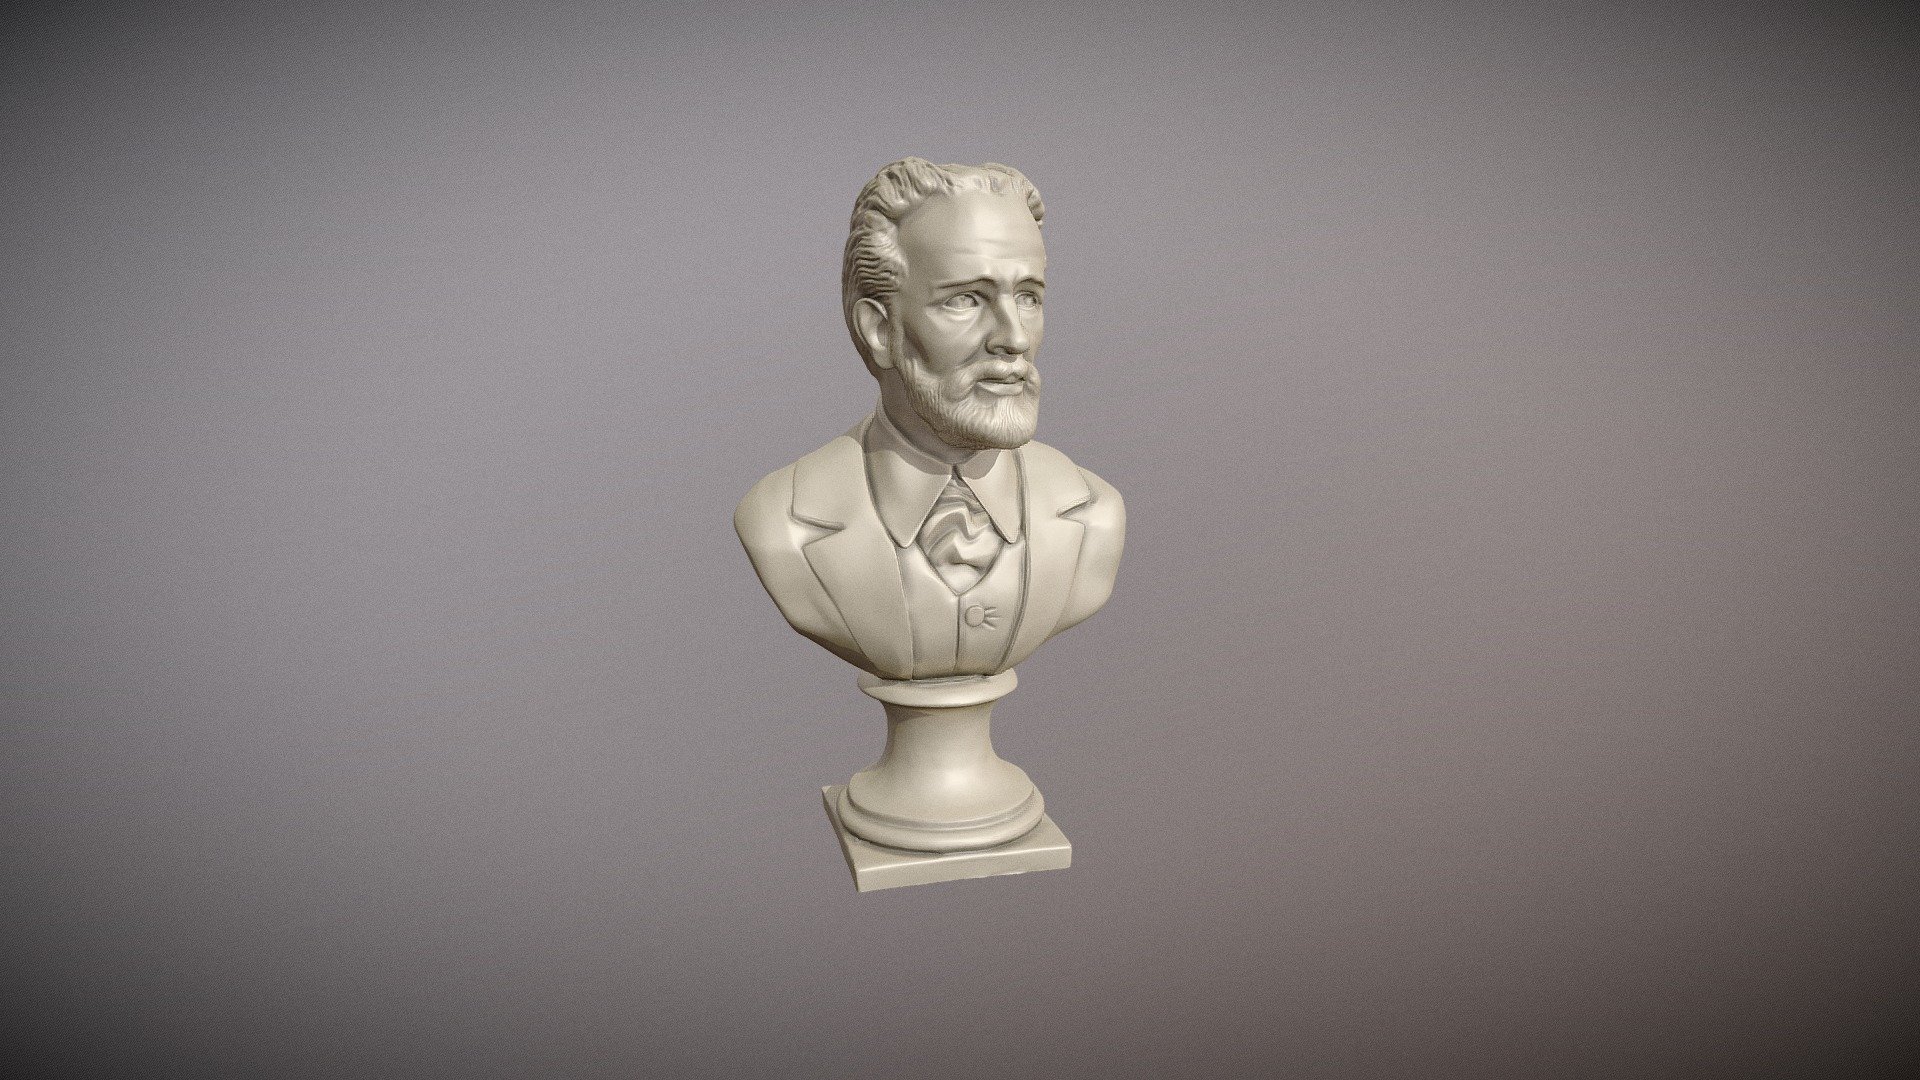 Bust of Tchaikovsky 3d model for print and paint - Bust of Tchaikovsky - Buy Royalty Free 3D model by abauerenator 3d model